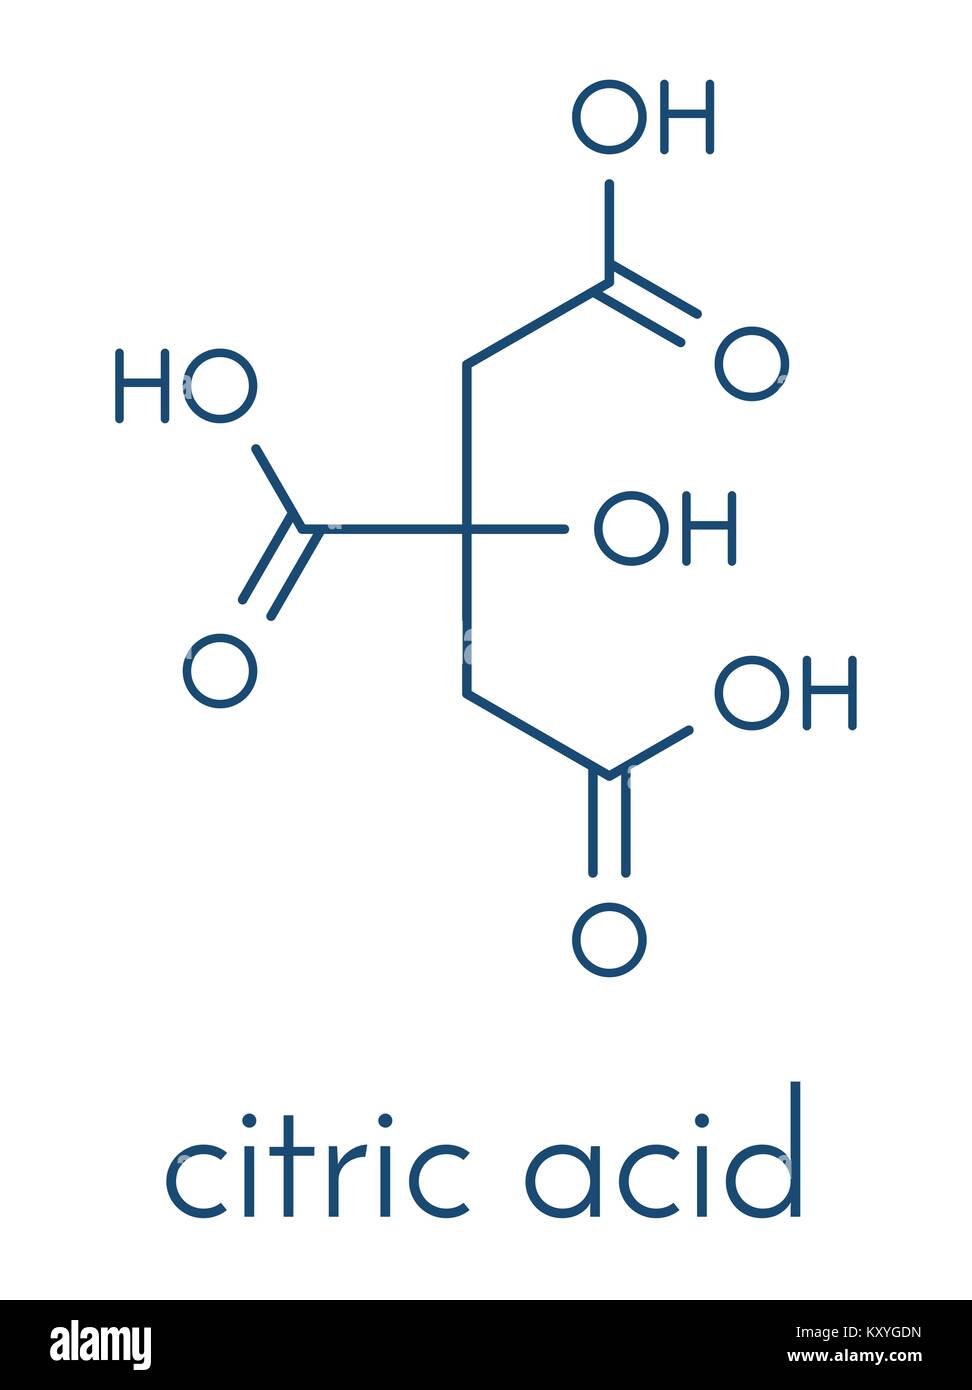 Citric Acid Molecule Common Fruit Acid Used As Food Additive And Stock Vector Image Art Alamy,Whiskey Sour Cocktail Recipe